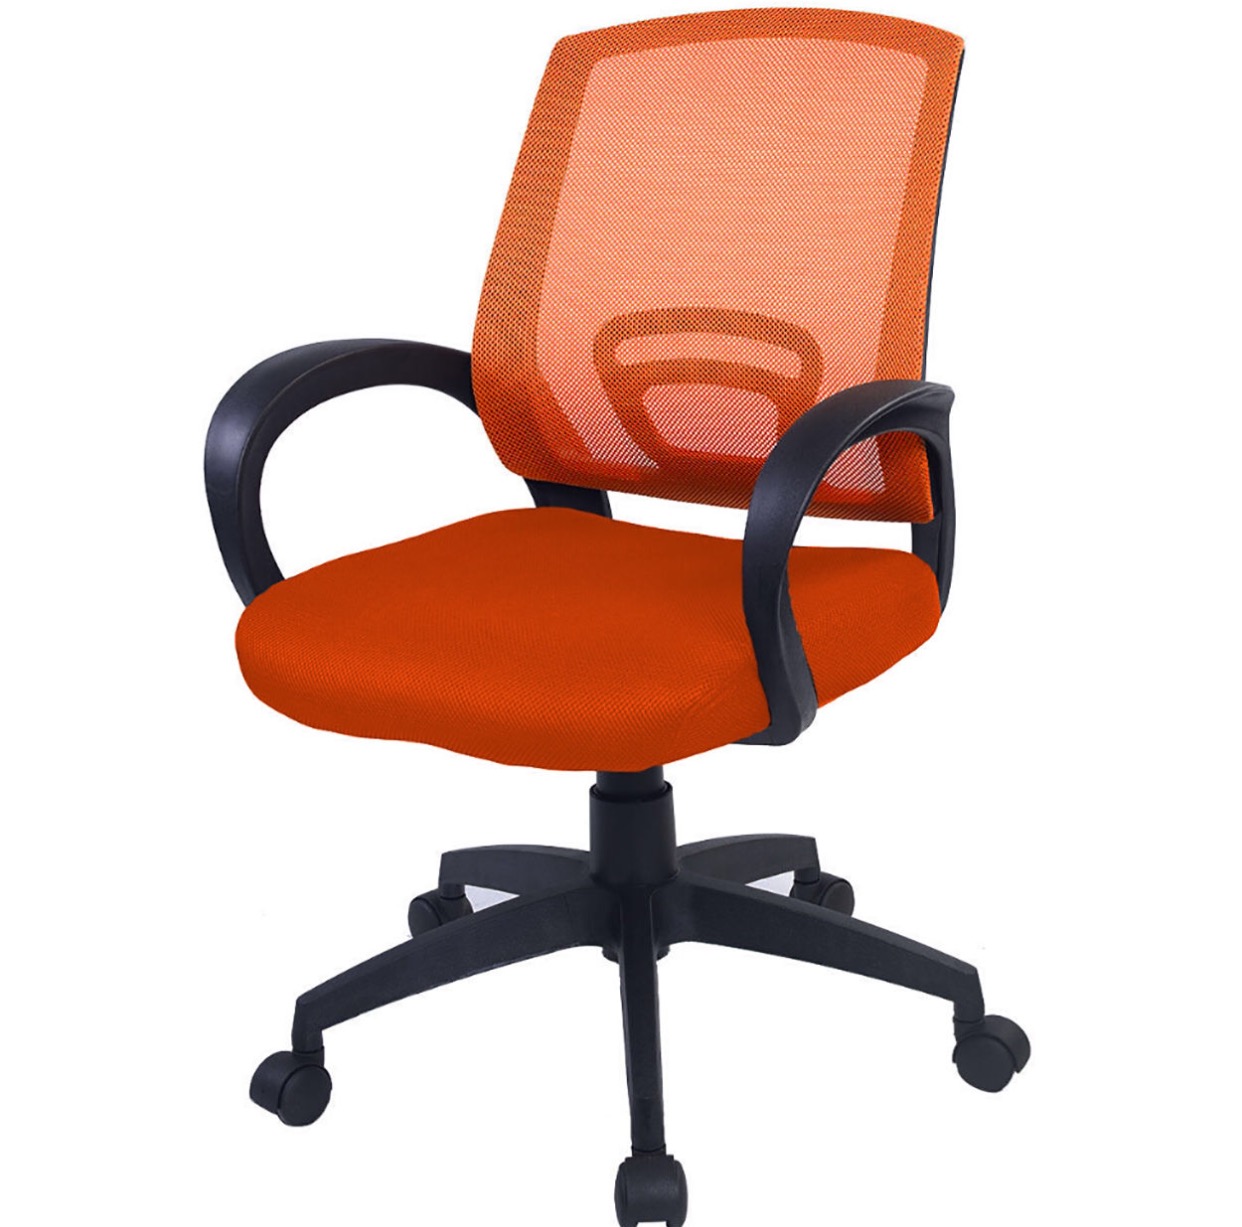 Student or Office mesh armchair  matching seat  and back colours orange